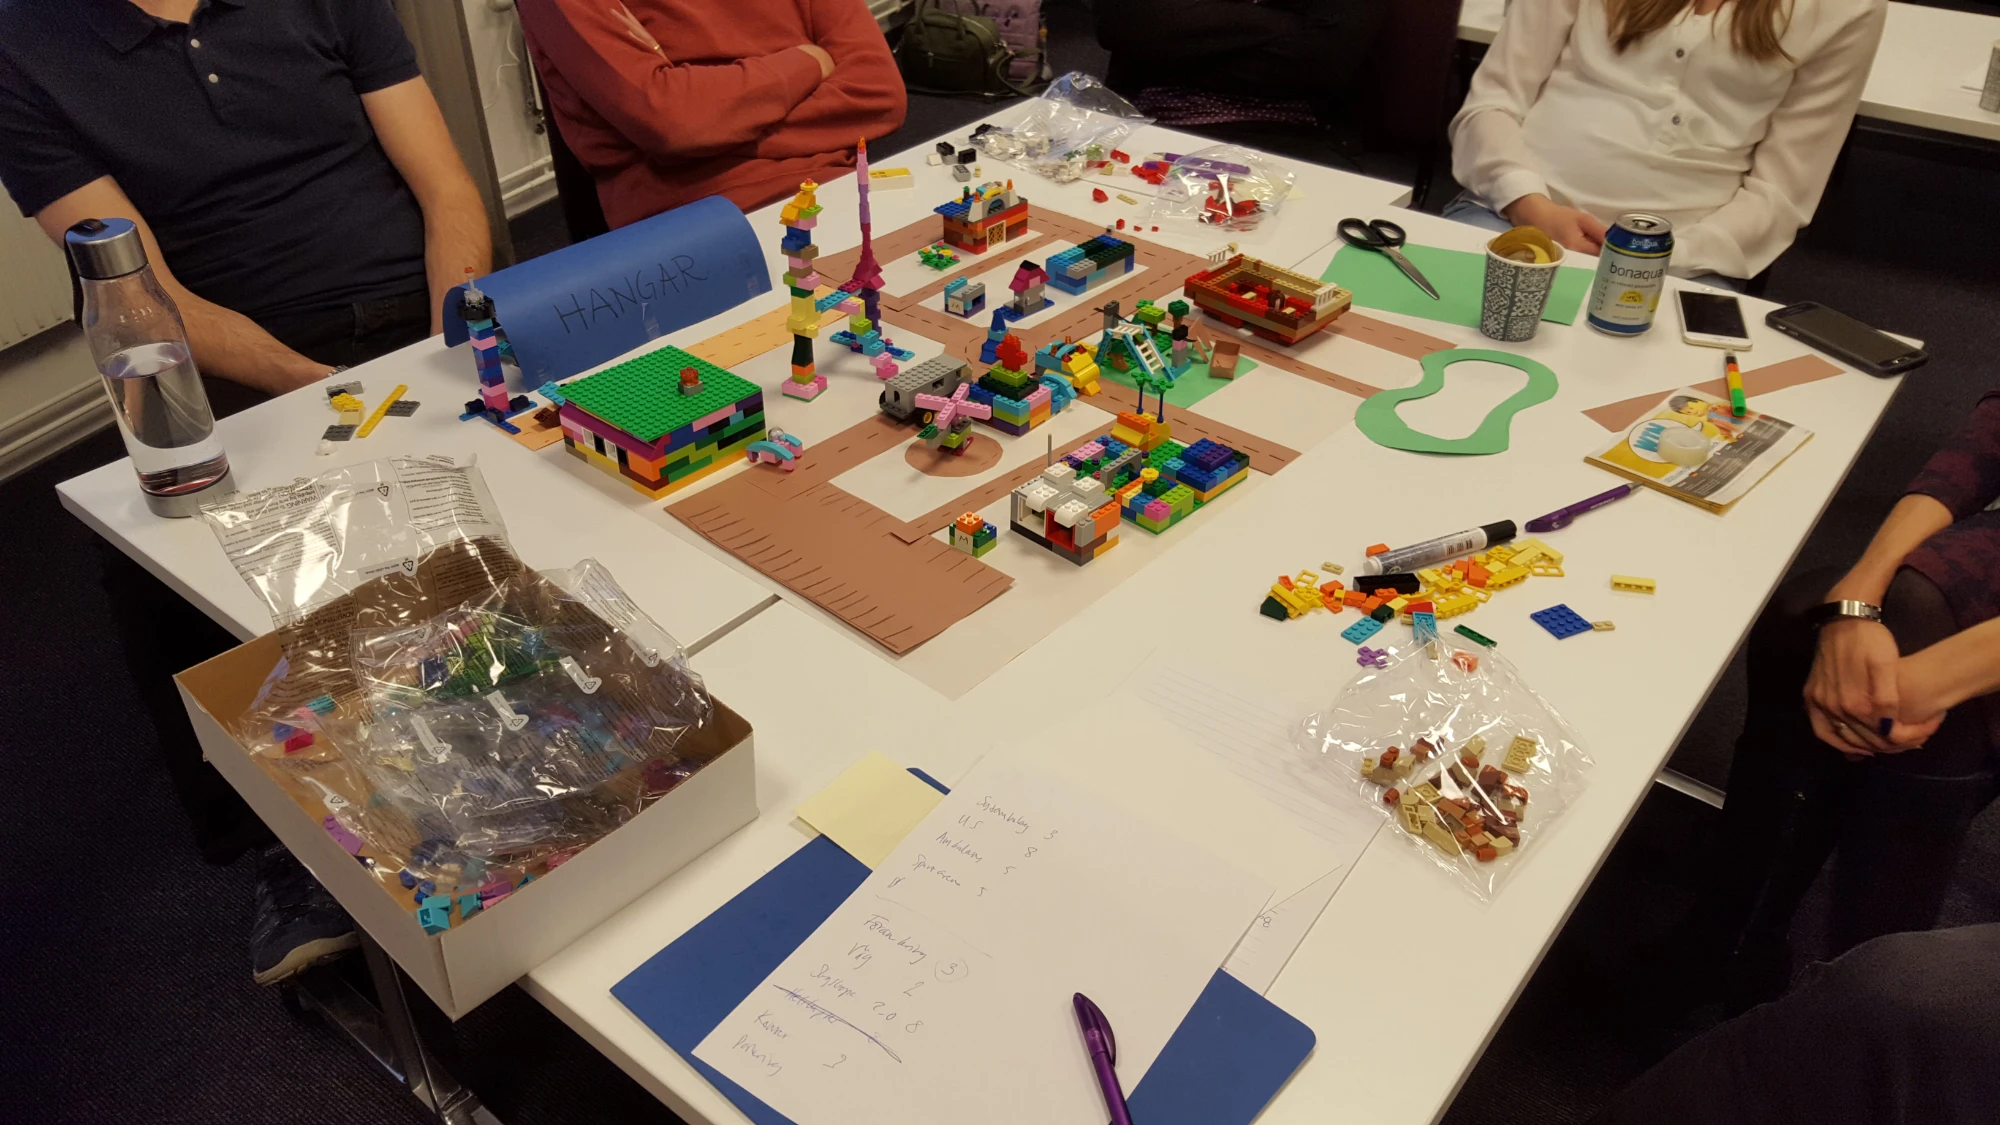 Lego city building at one of my Scrum workshops